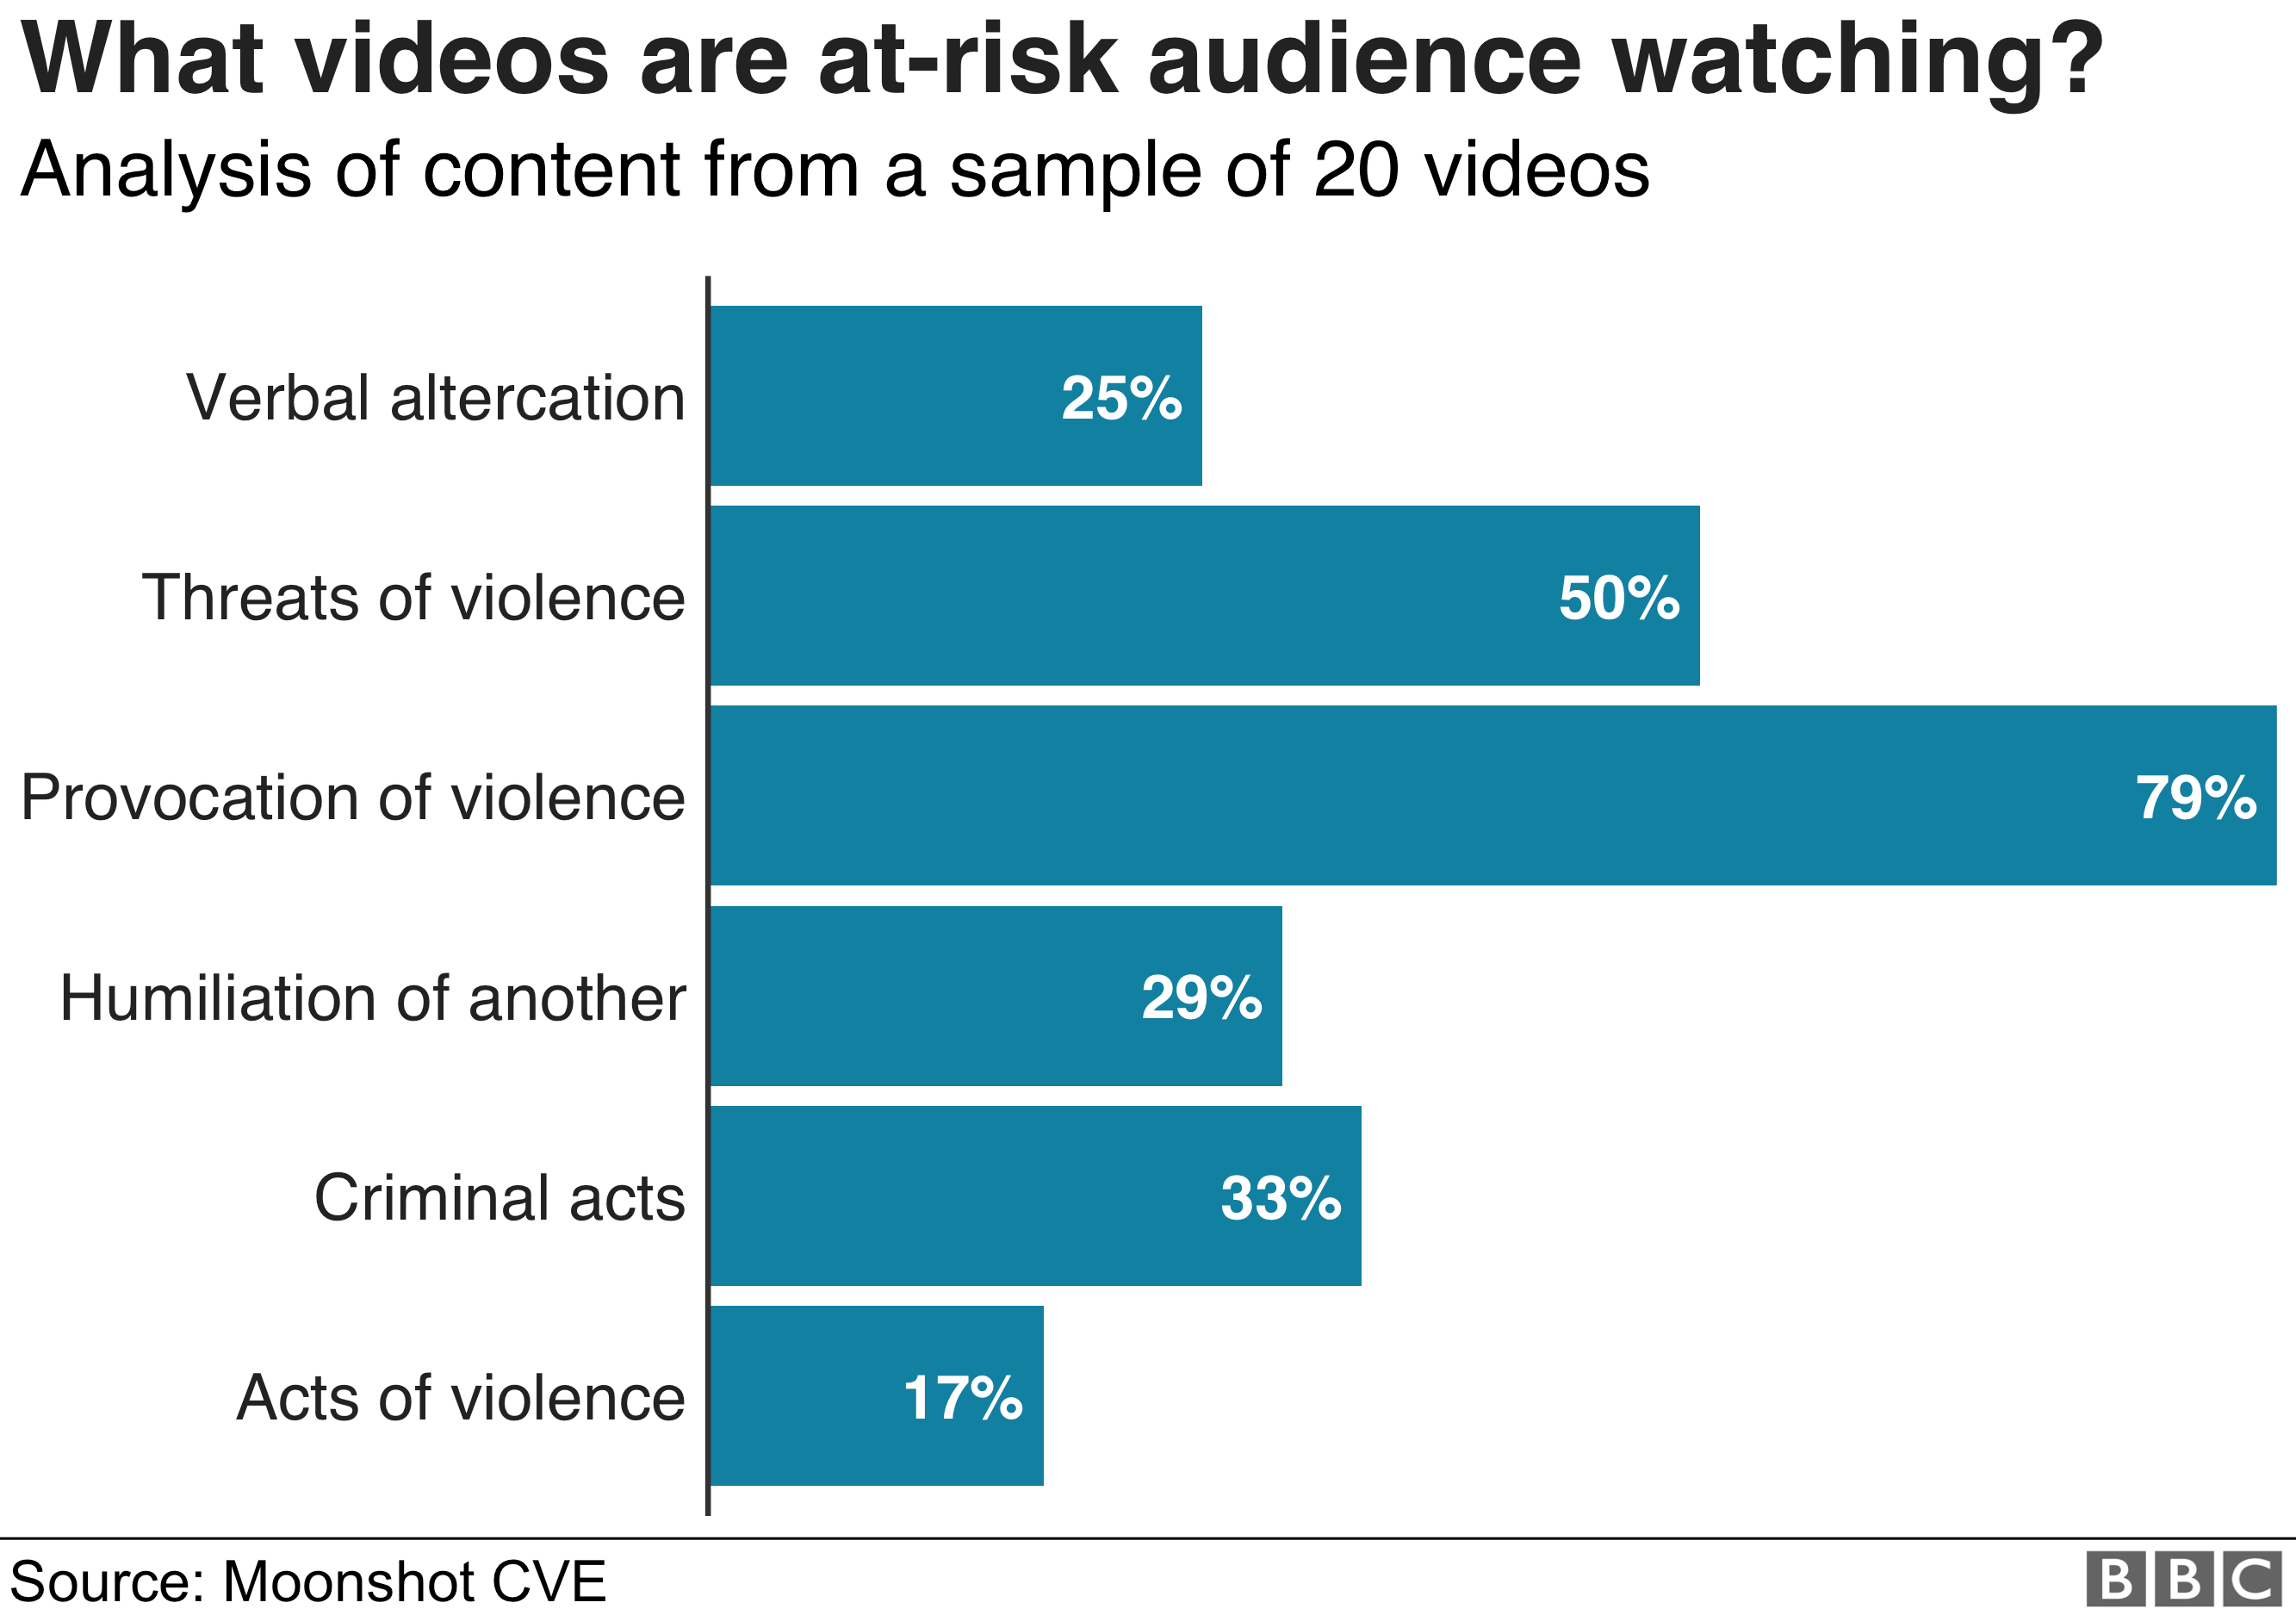 What videos are at-risk audience watching?